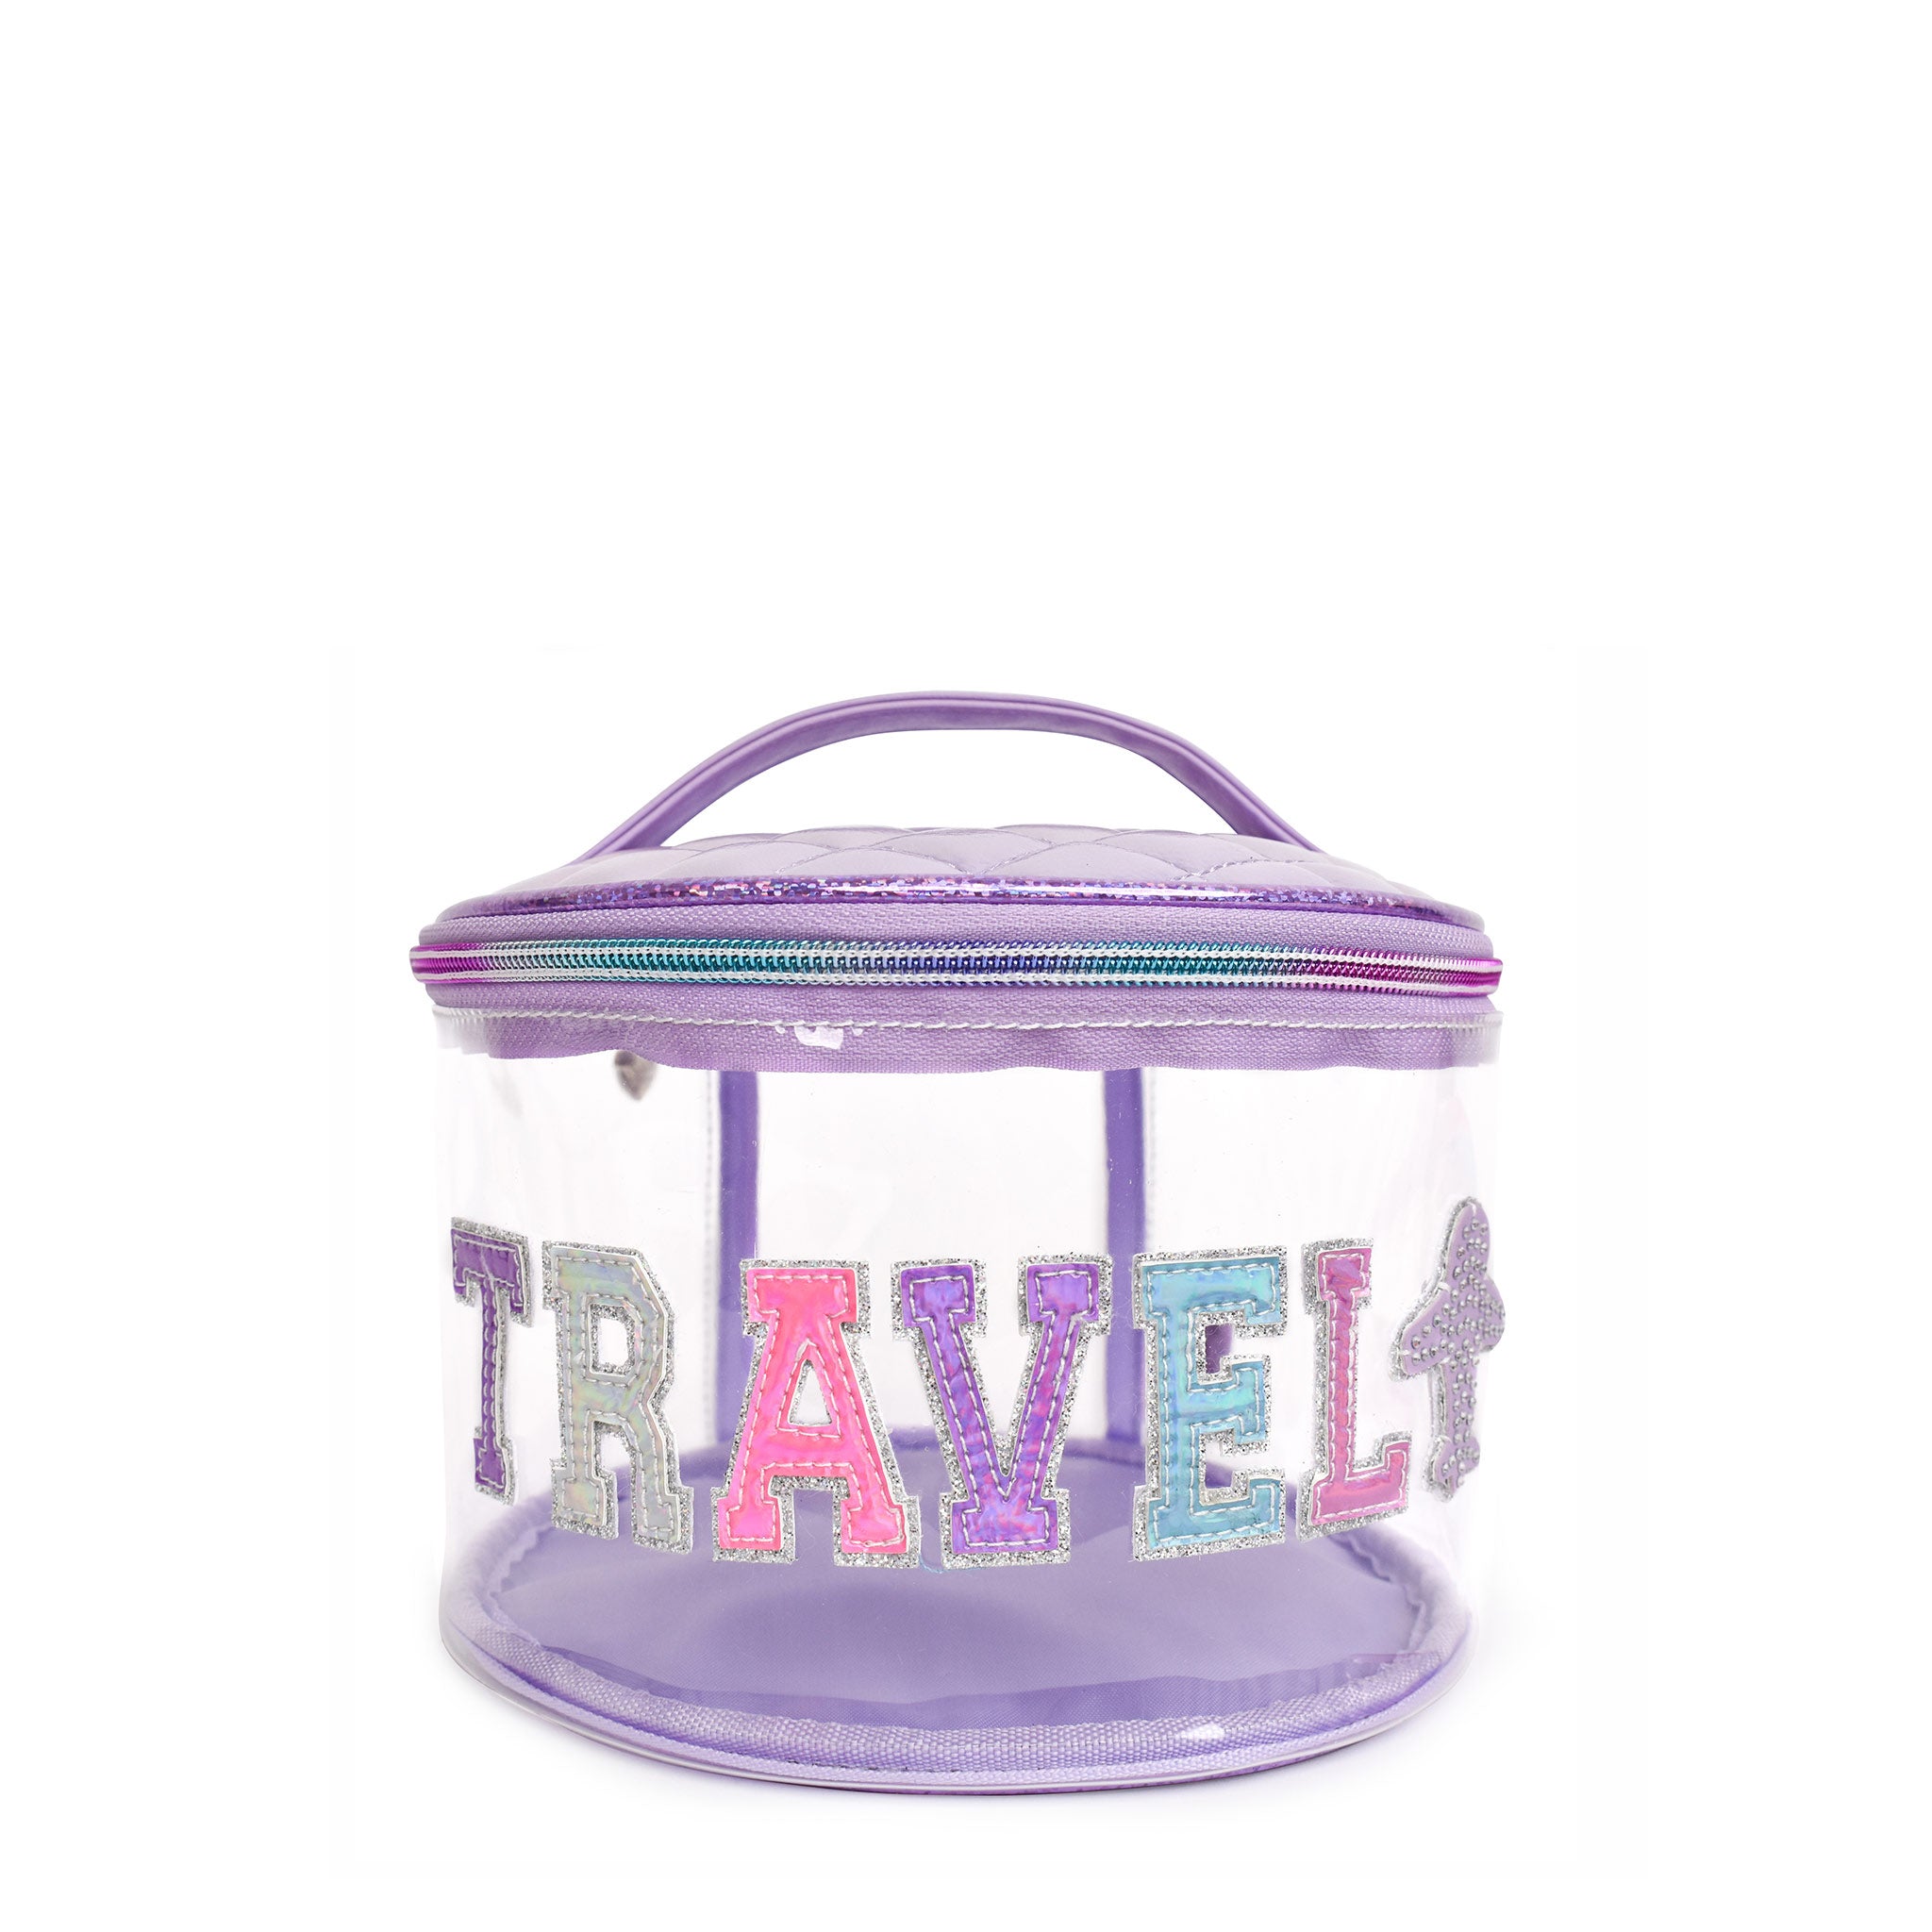 Front view of clear round purple 'Travel' glam bag with reflective varsity-letter patches